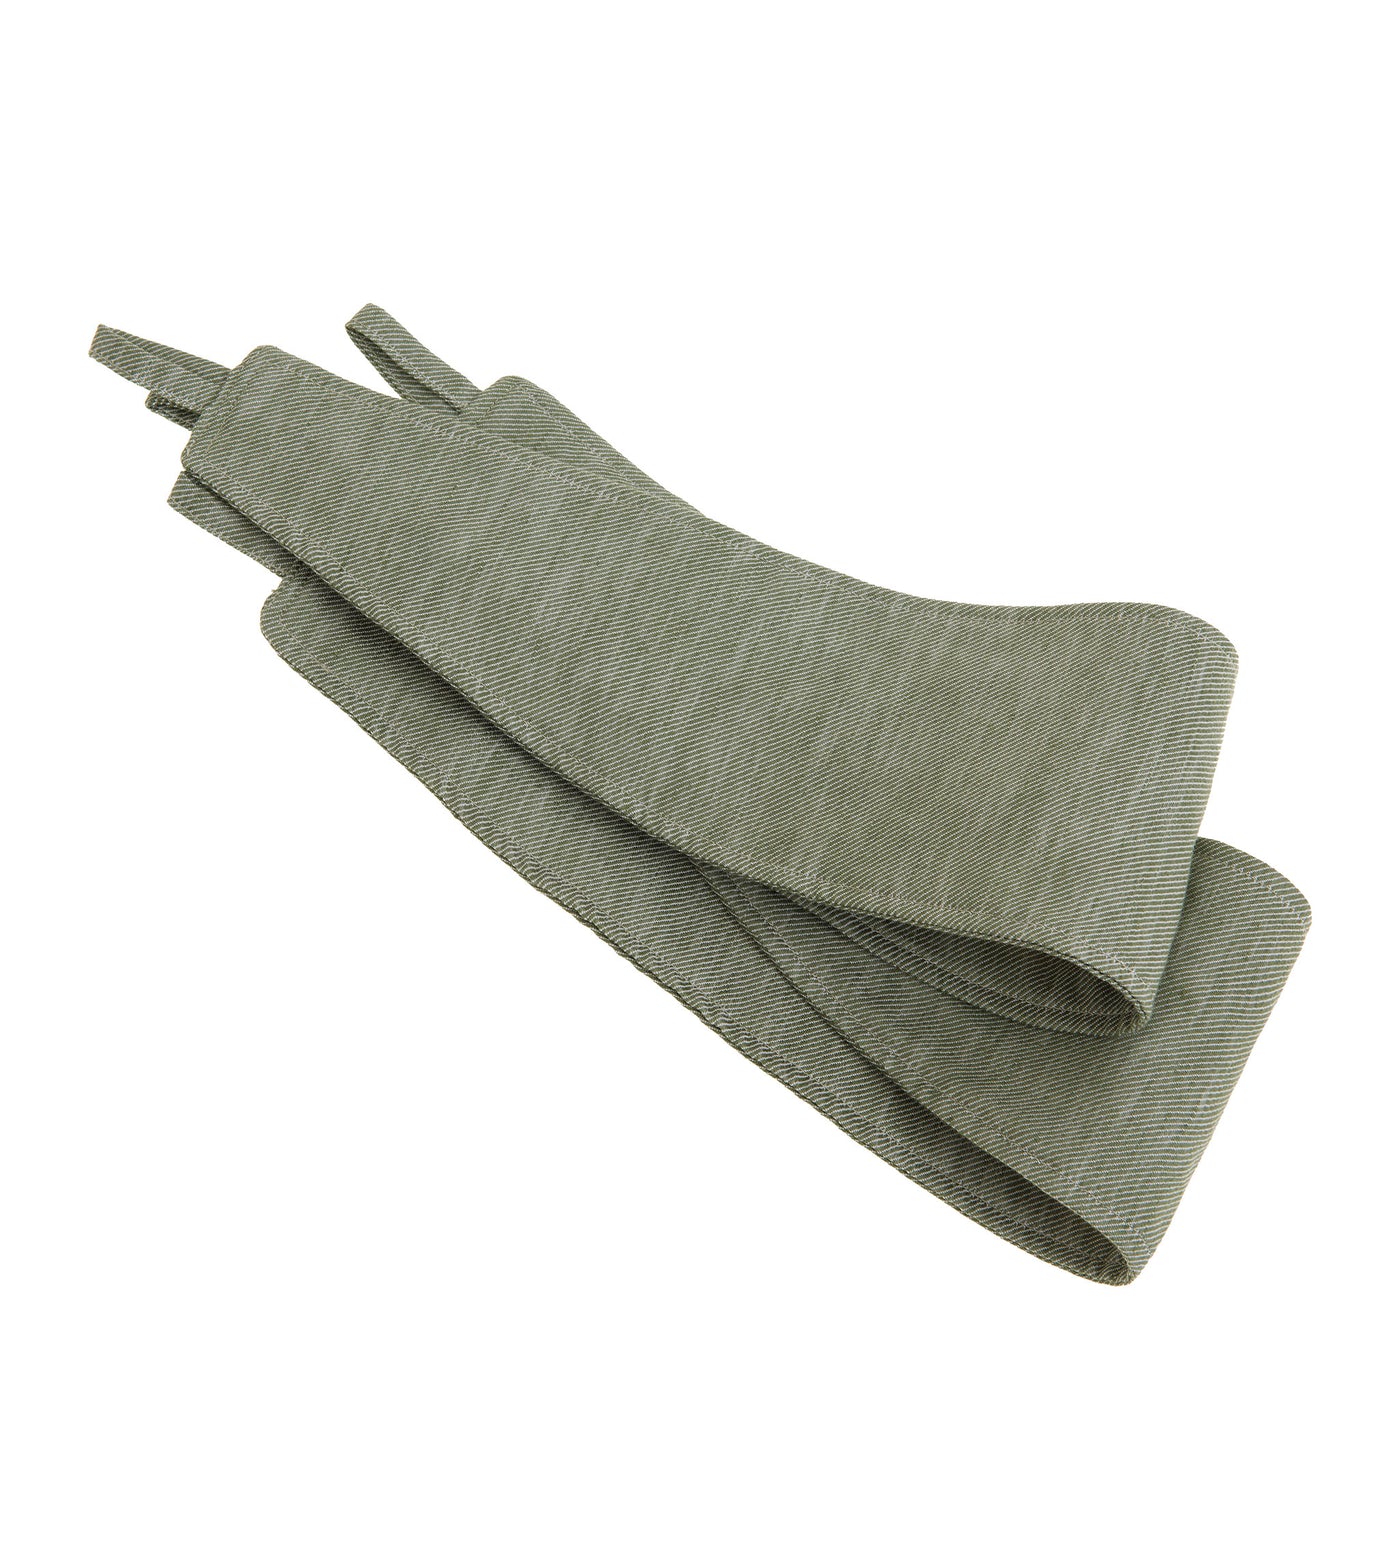 Olive Green Twill Cotton Linen Curtain Tie Backs (Pair)